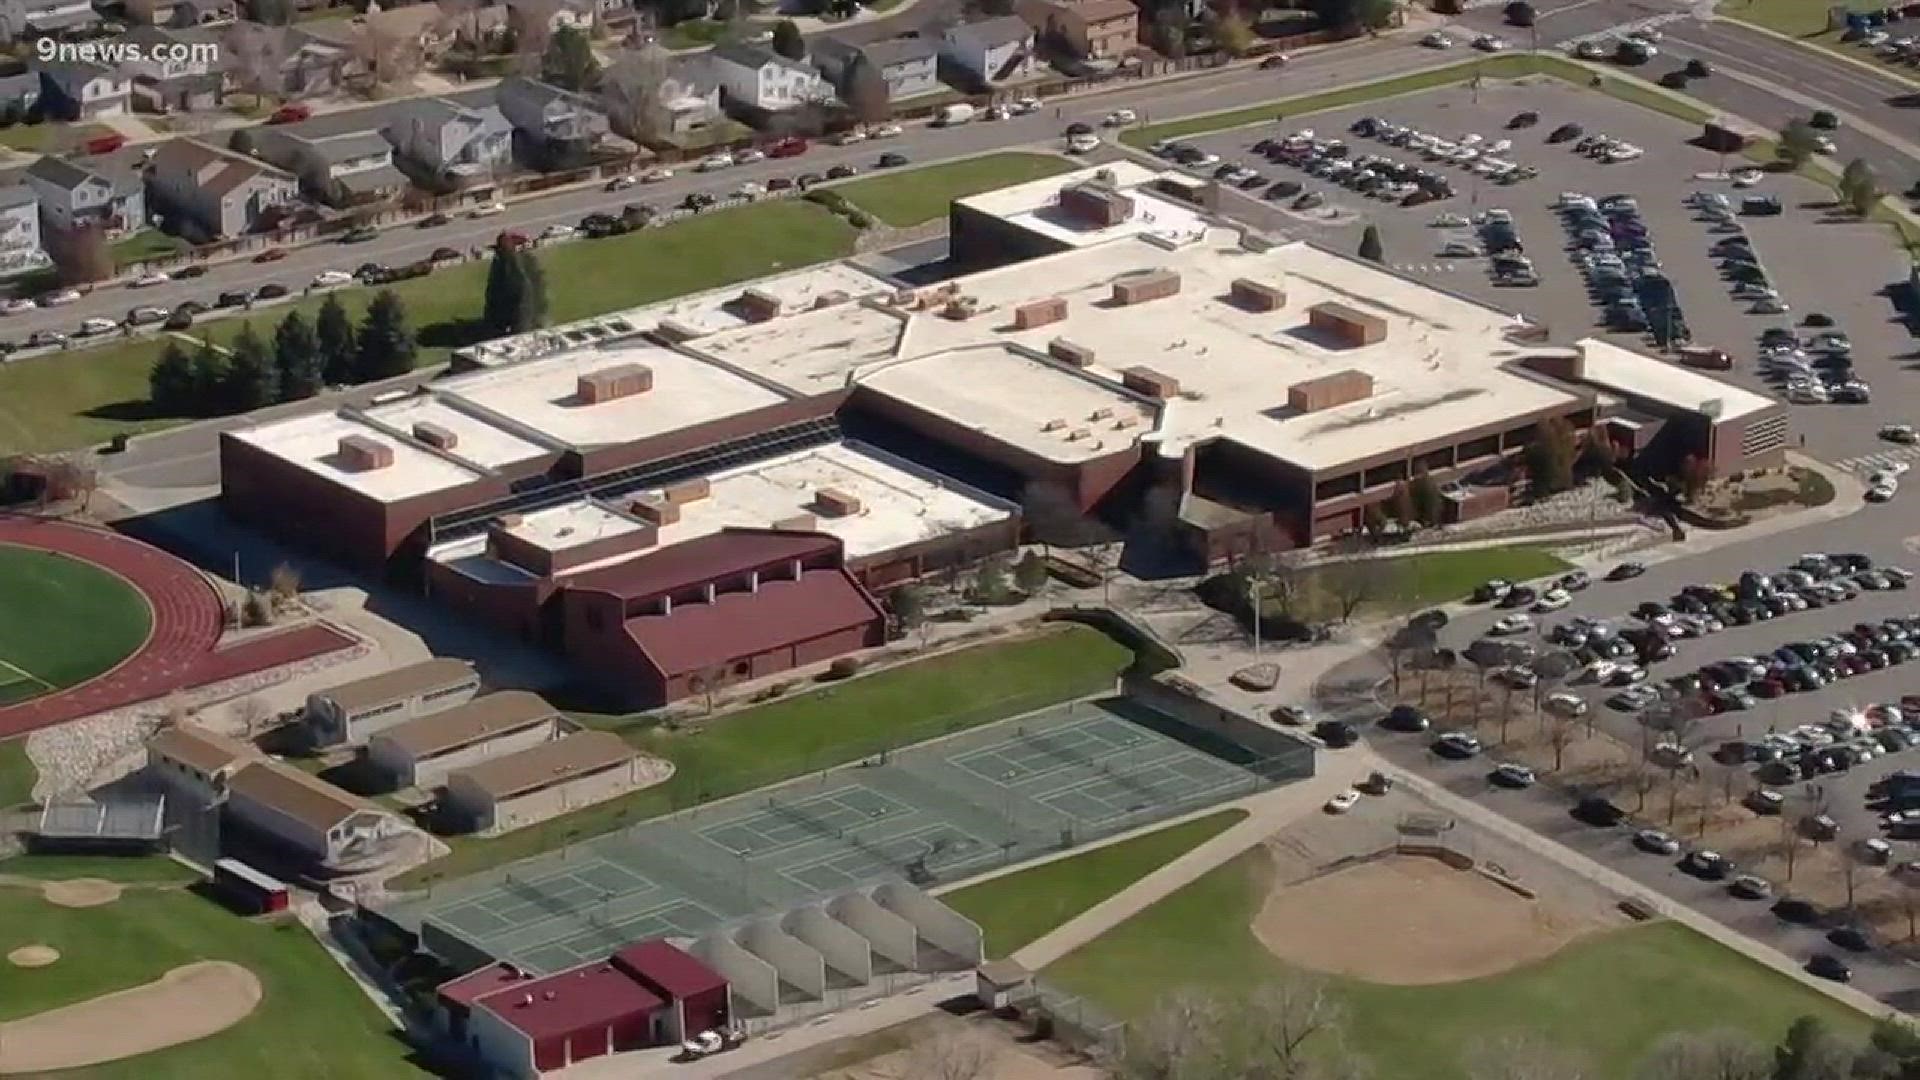 Two Rangeview High School students face criminal charges after a Snapchat photo that appeared to depict a gun on campus led to a lockdown and response from more than 70 Aurora officers.